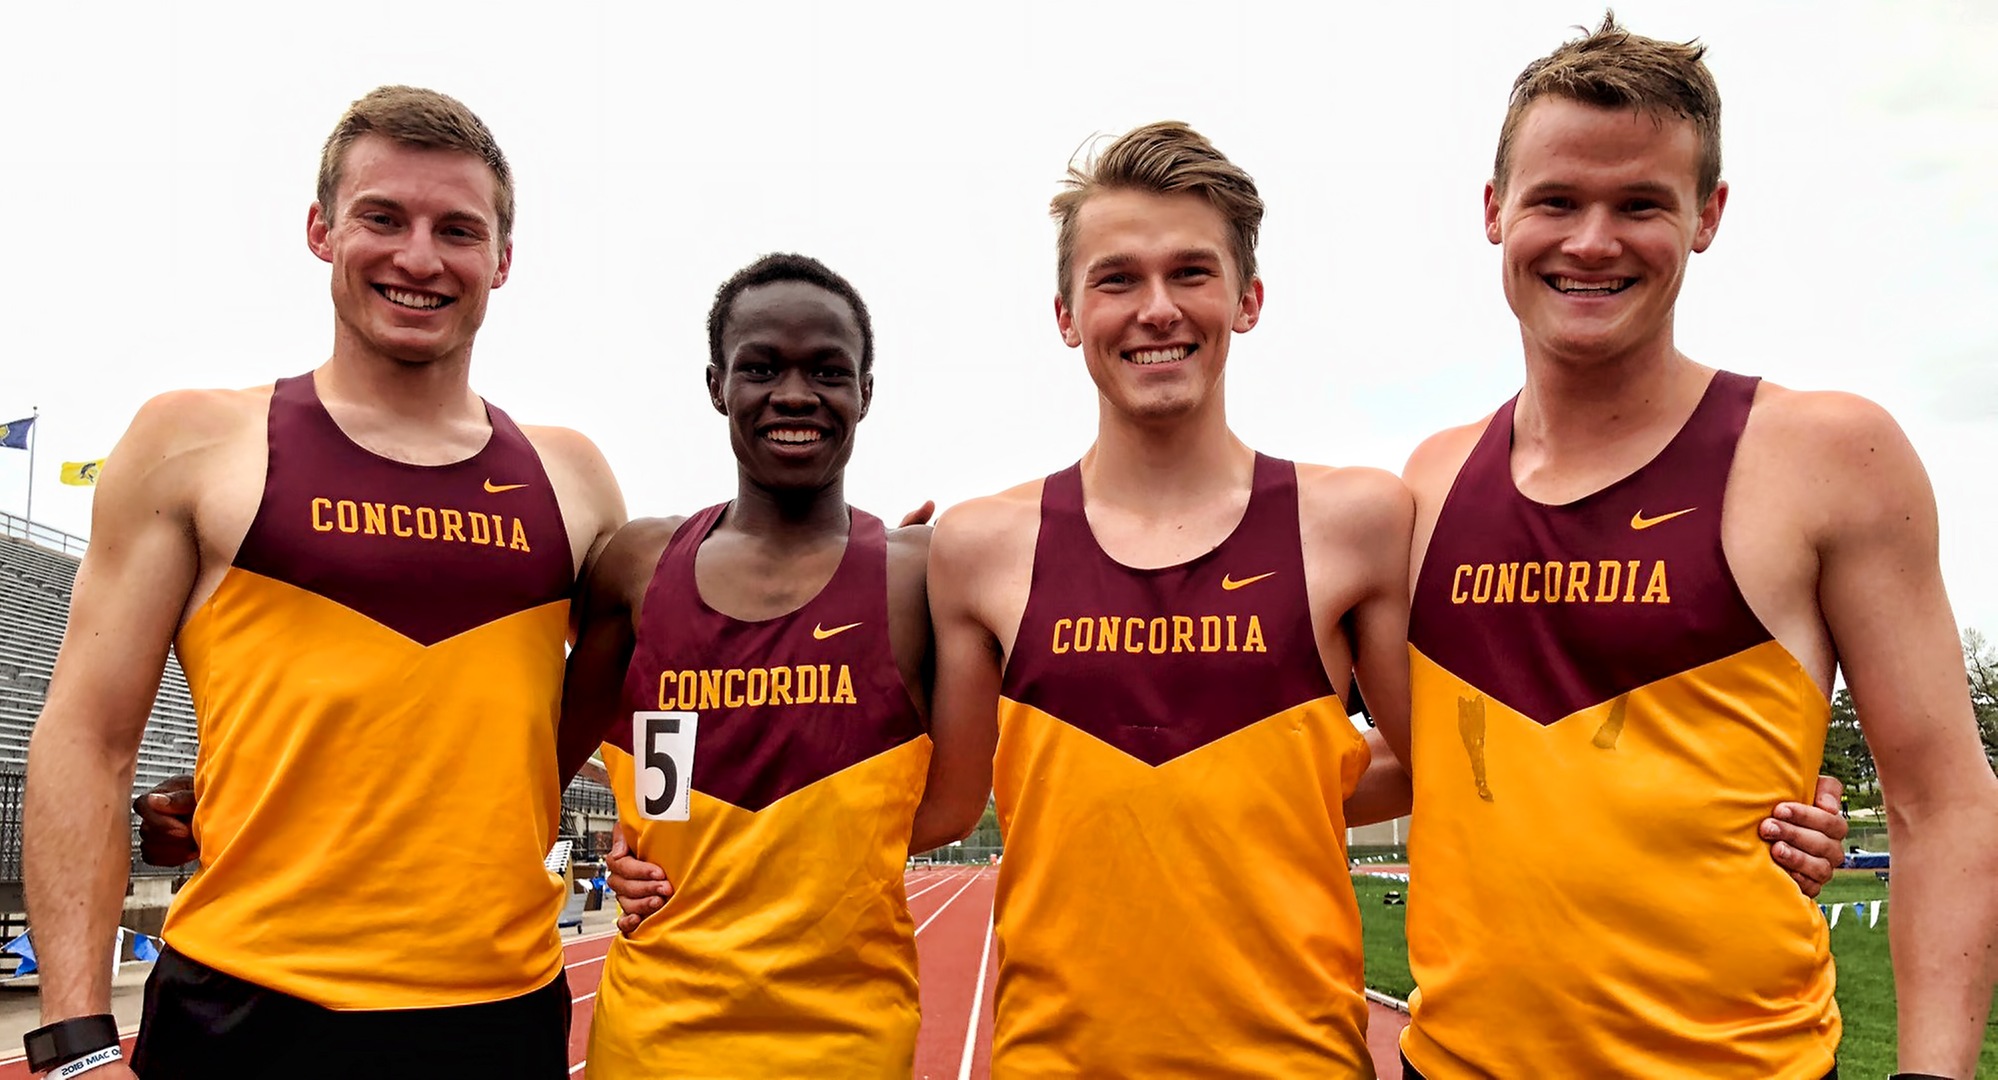 The 4x800-meter relay team of (L-R) David Supinski, Munir Isahak, Connor Haugrud & Nick Solheim posted the fourth fastest time in school history at the MIAC Meet.